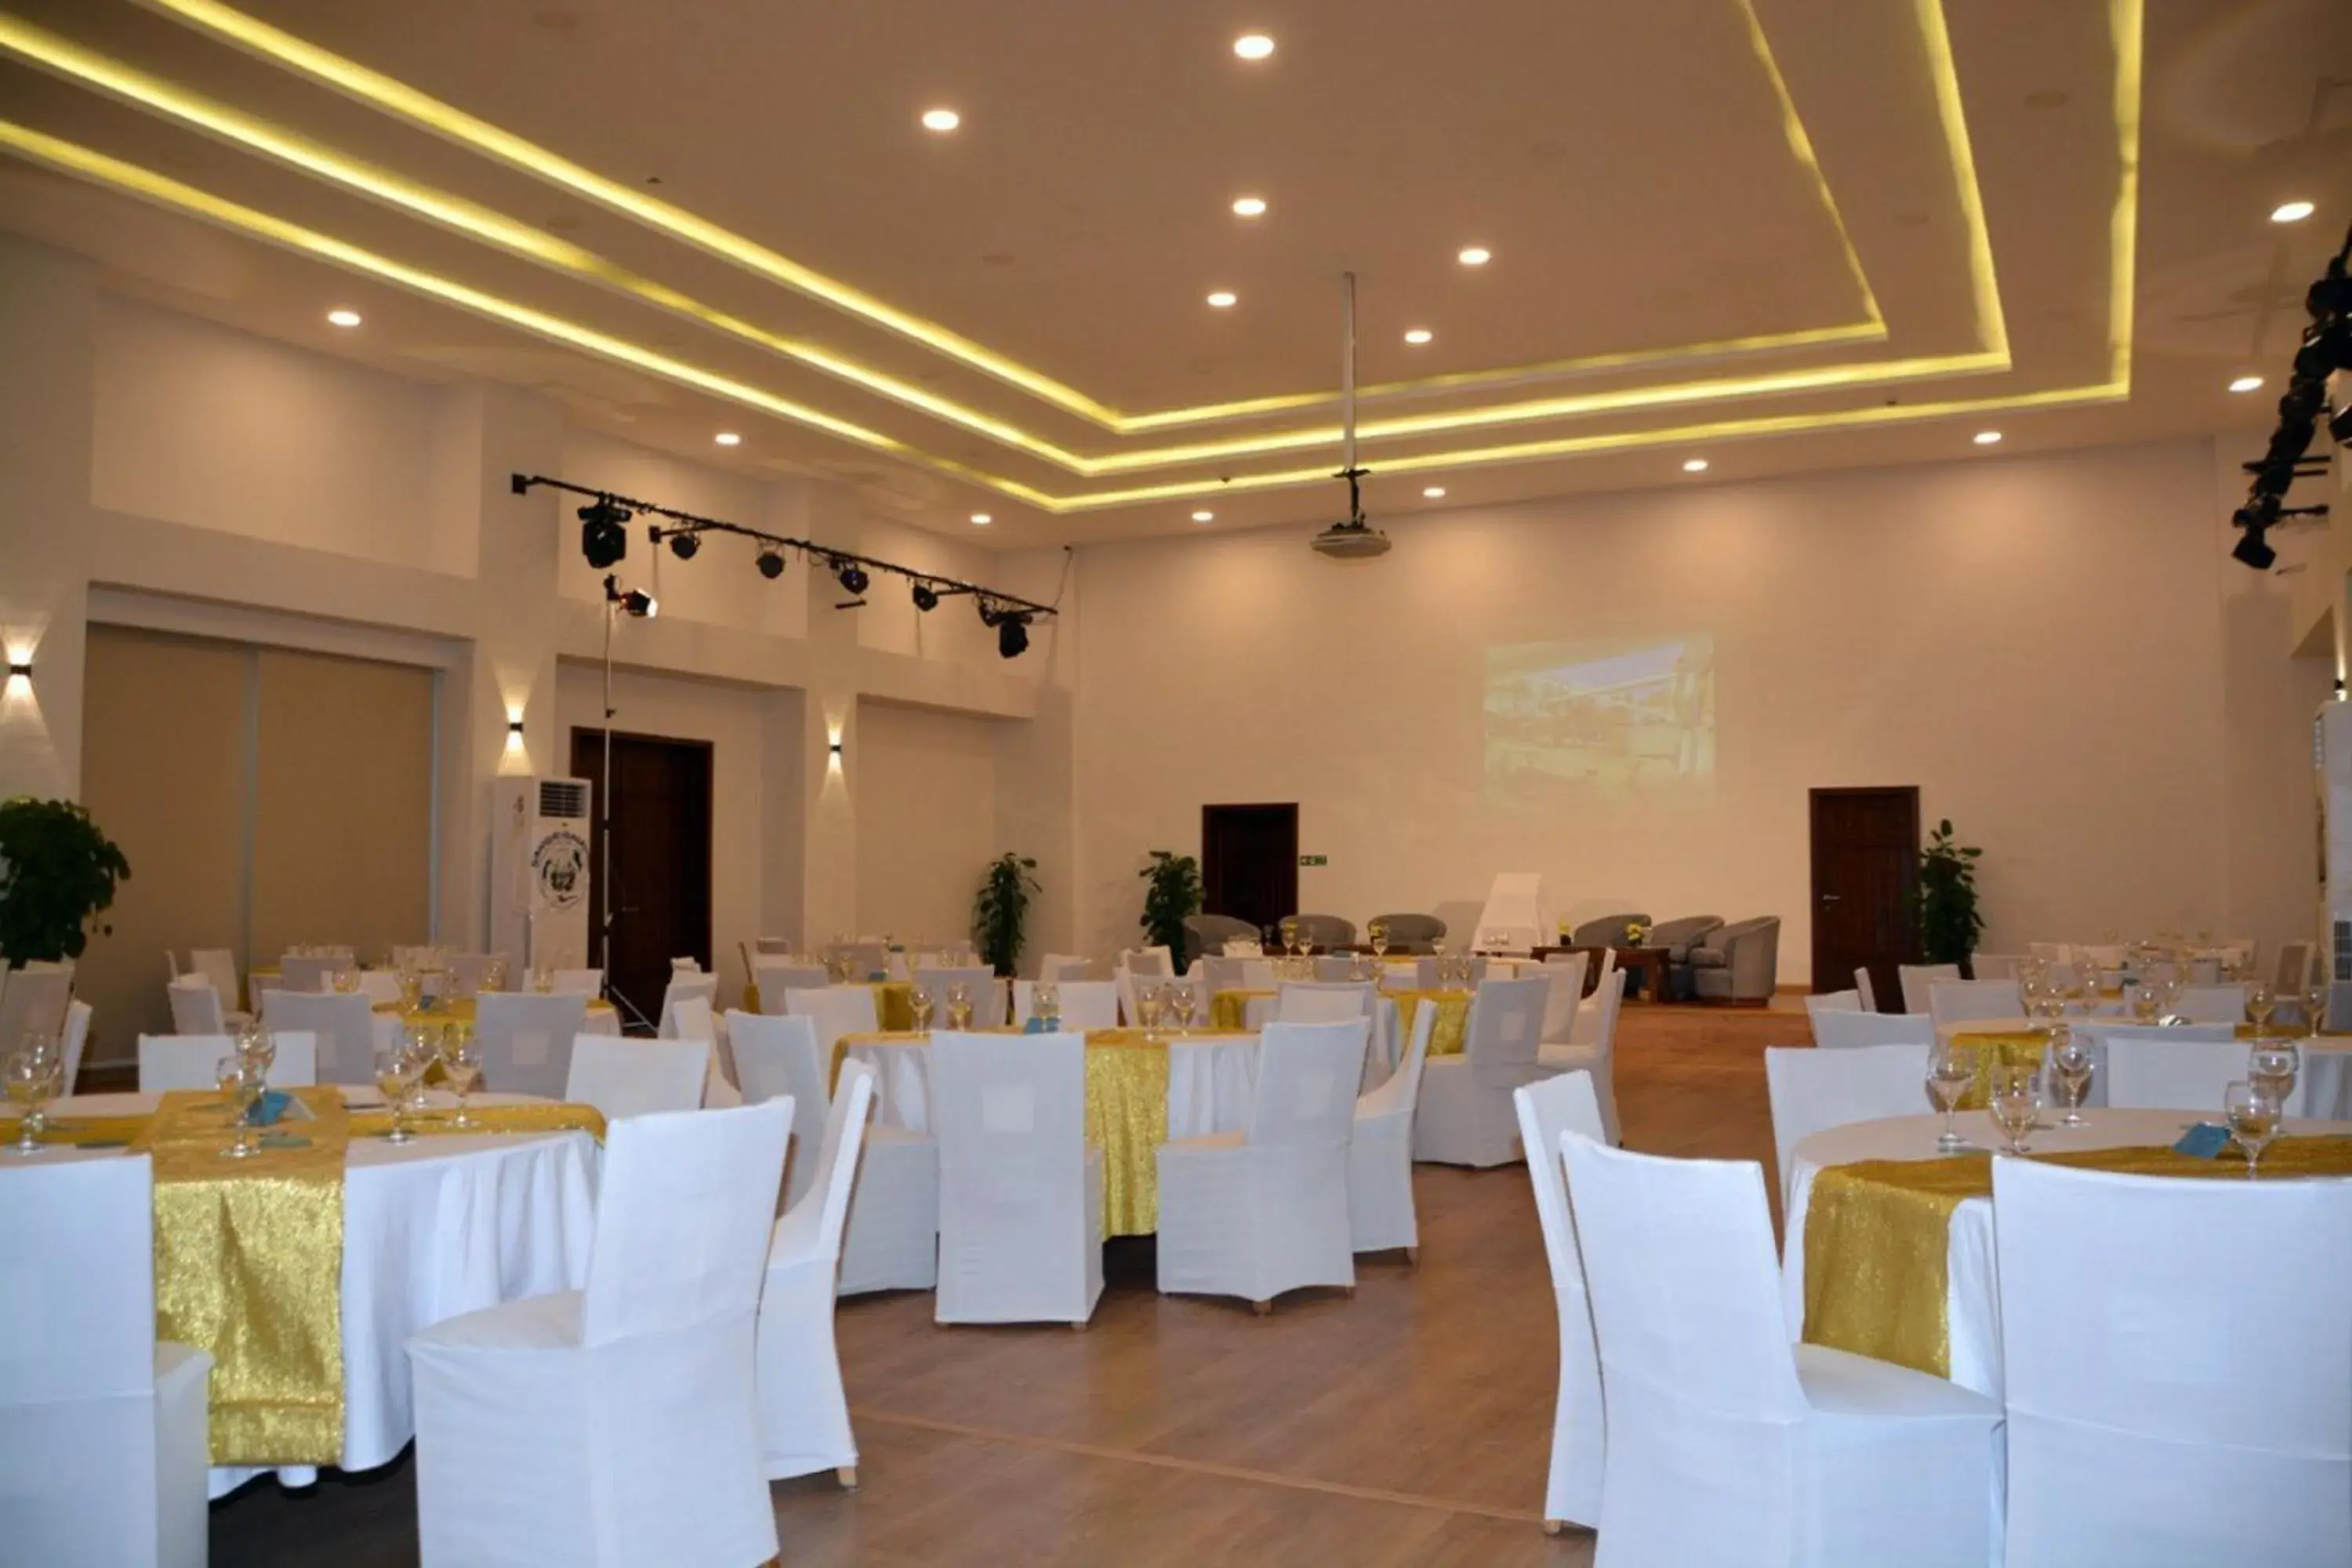 Meeting/conference room, Banquet Facilities in Club Reef Resort